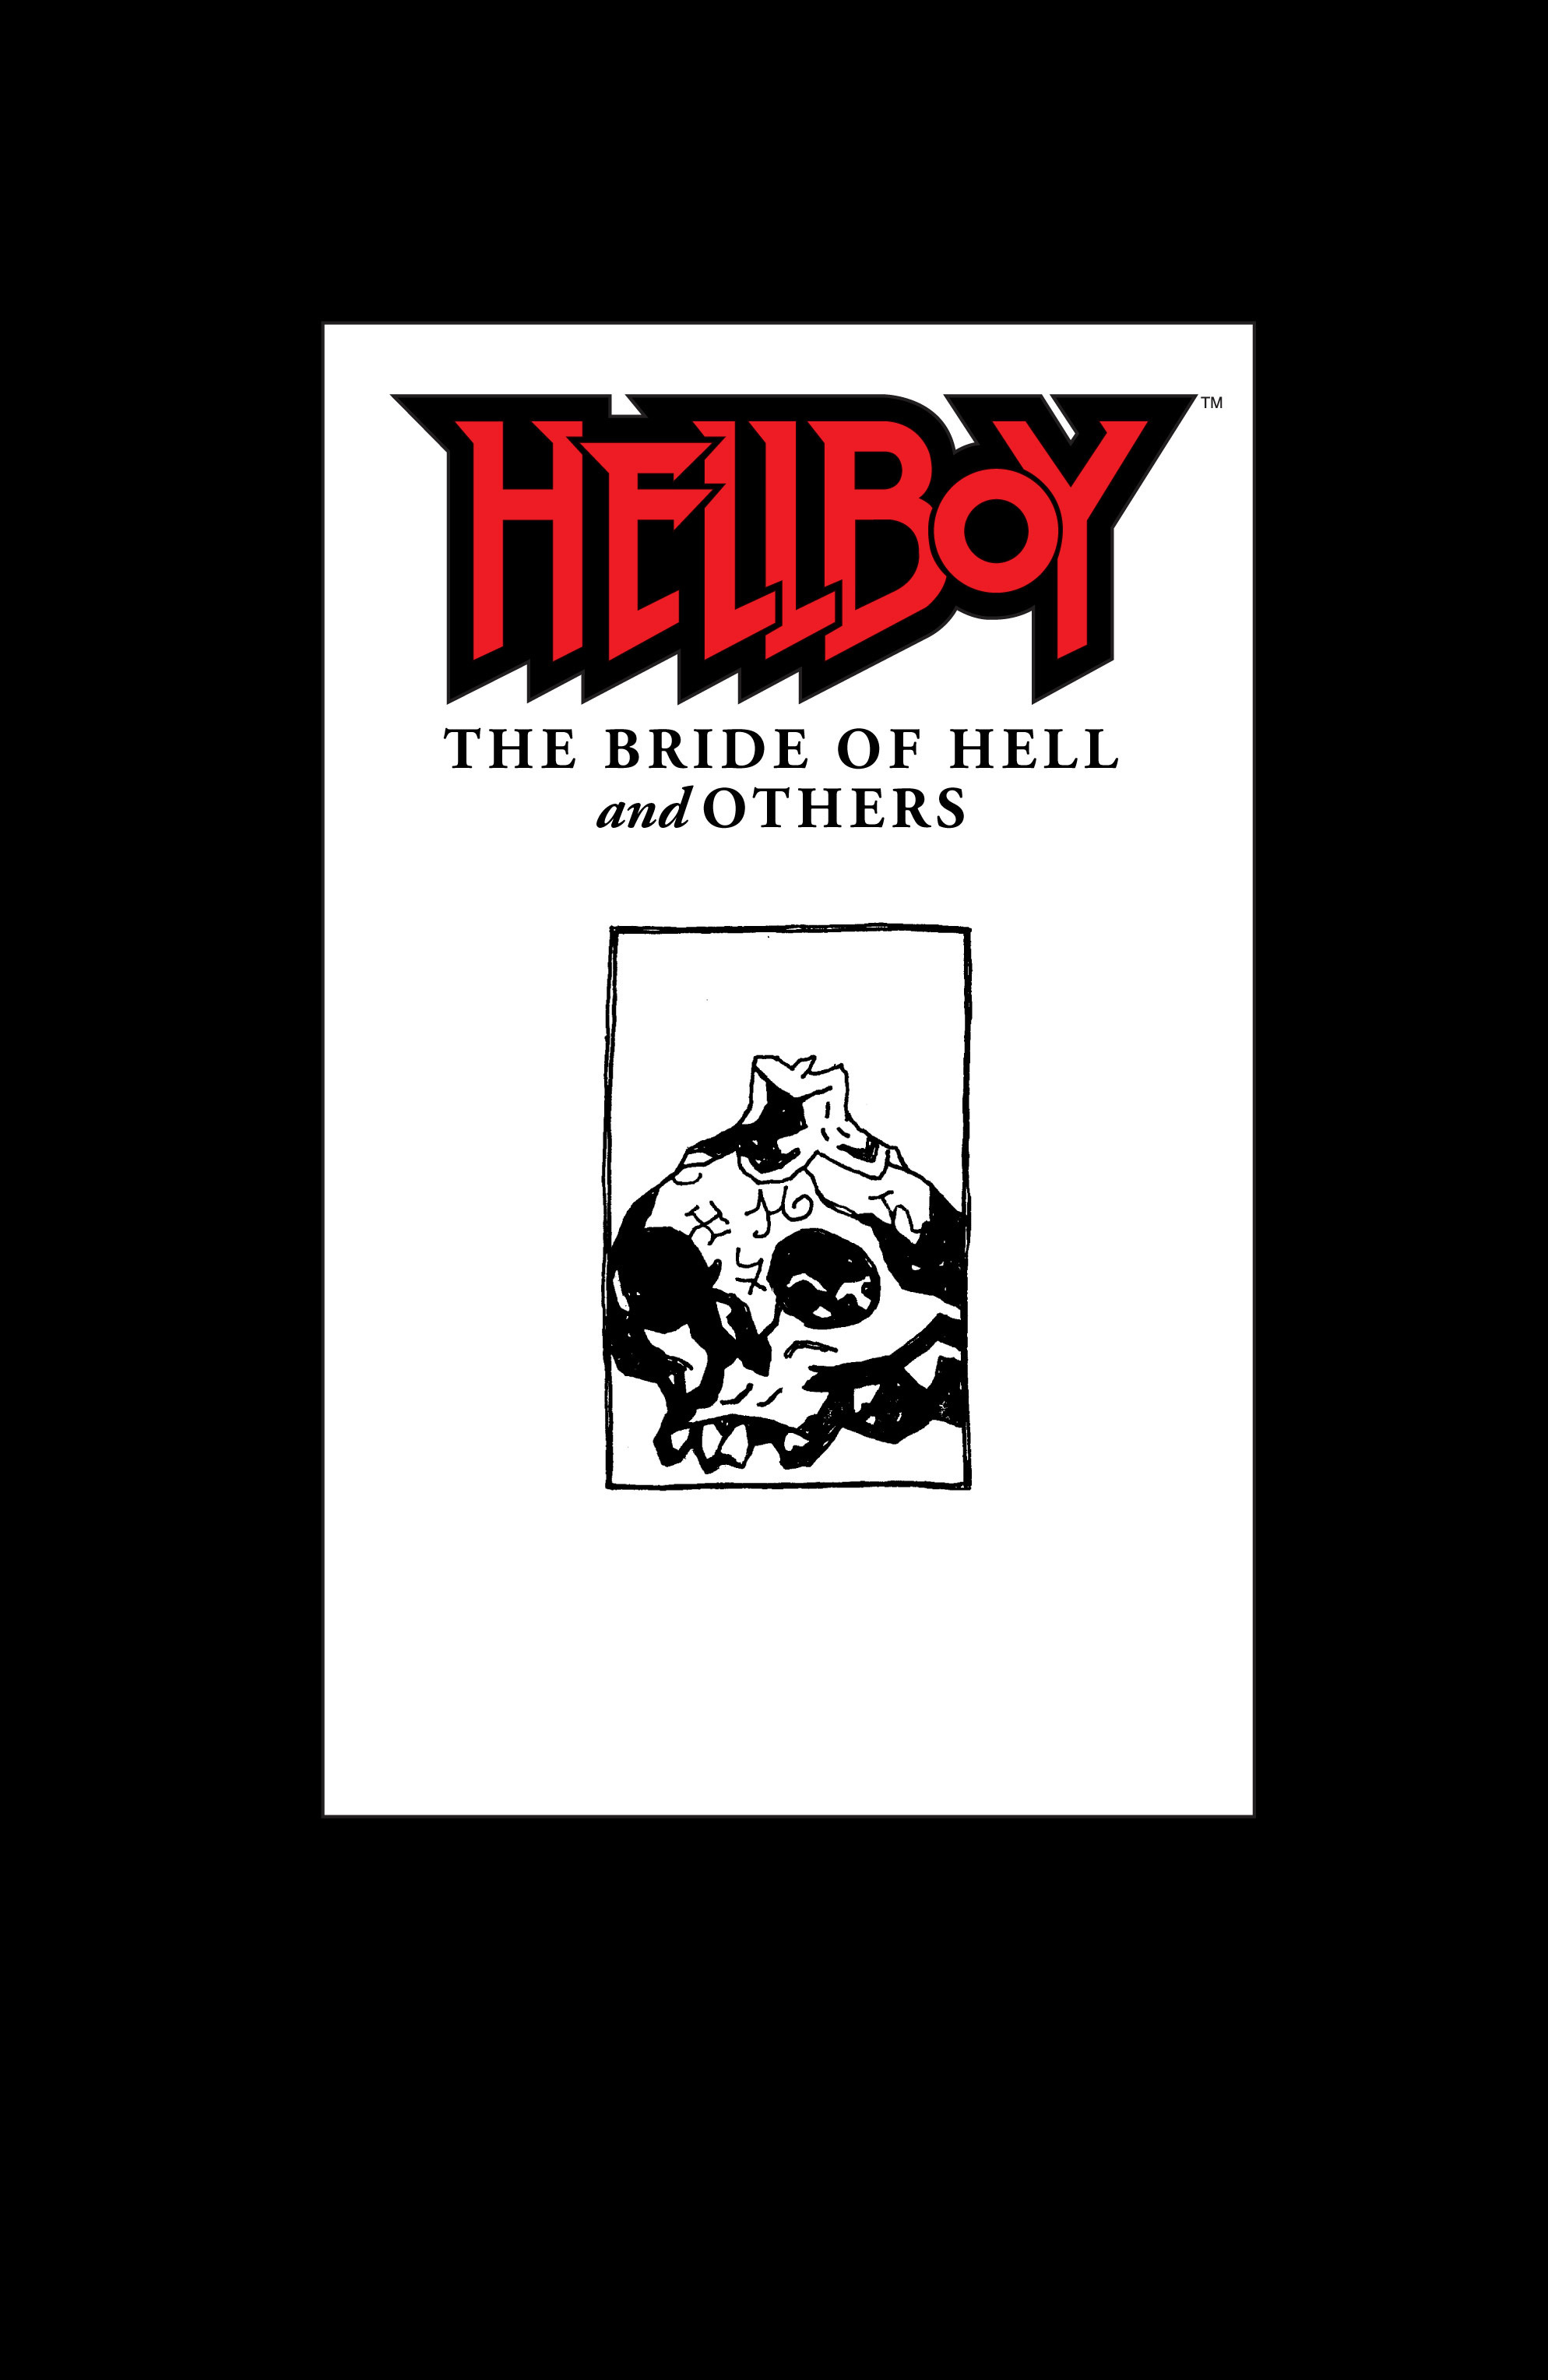 Read online Hellboy comic -  Issue #11 - 3